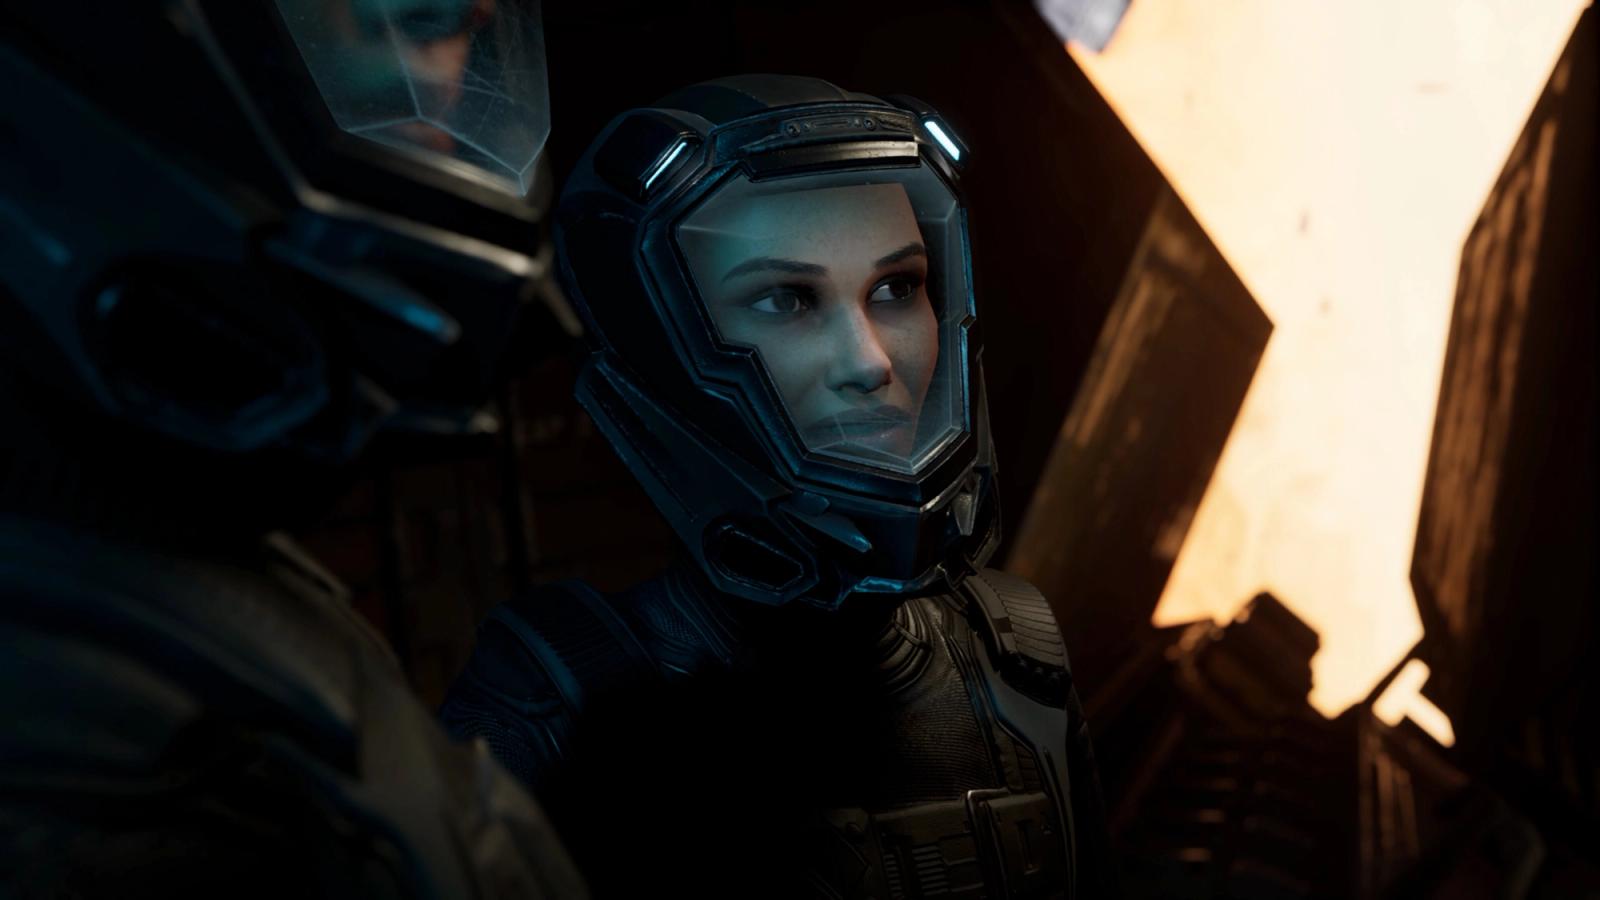 drummer in The expanse game